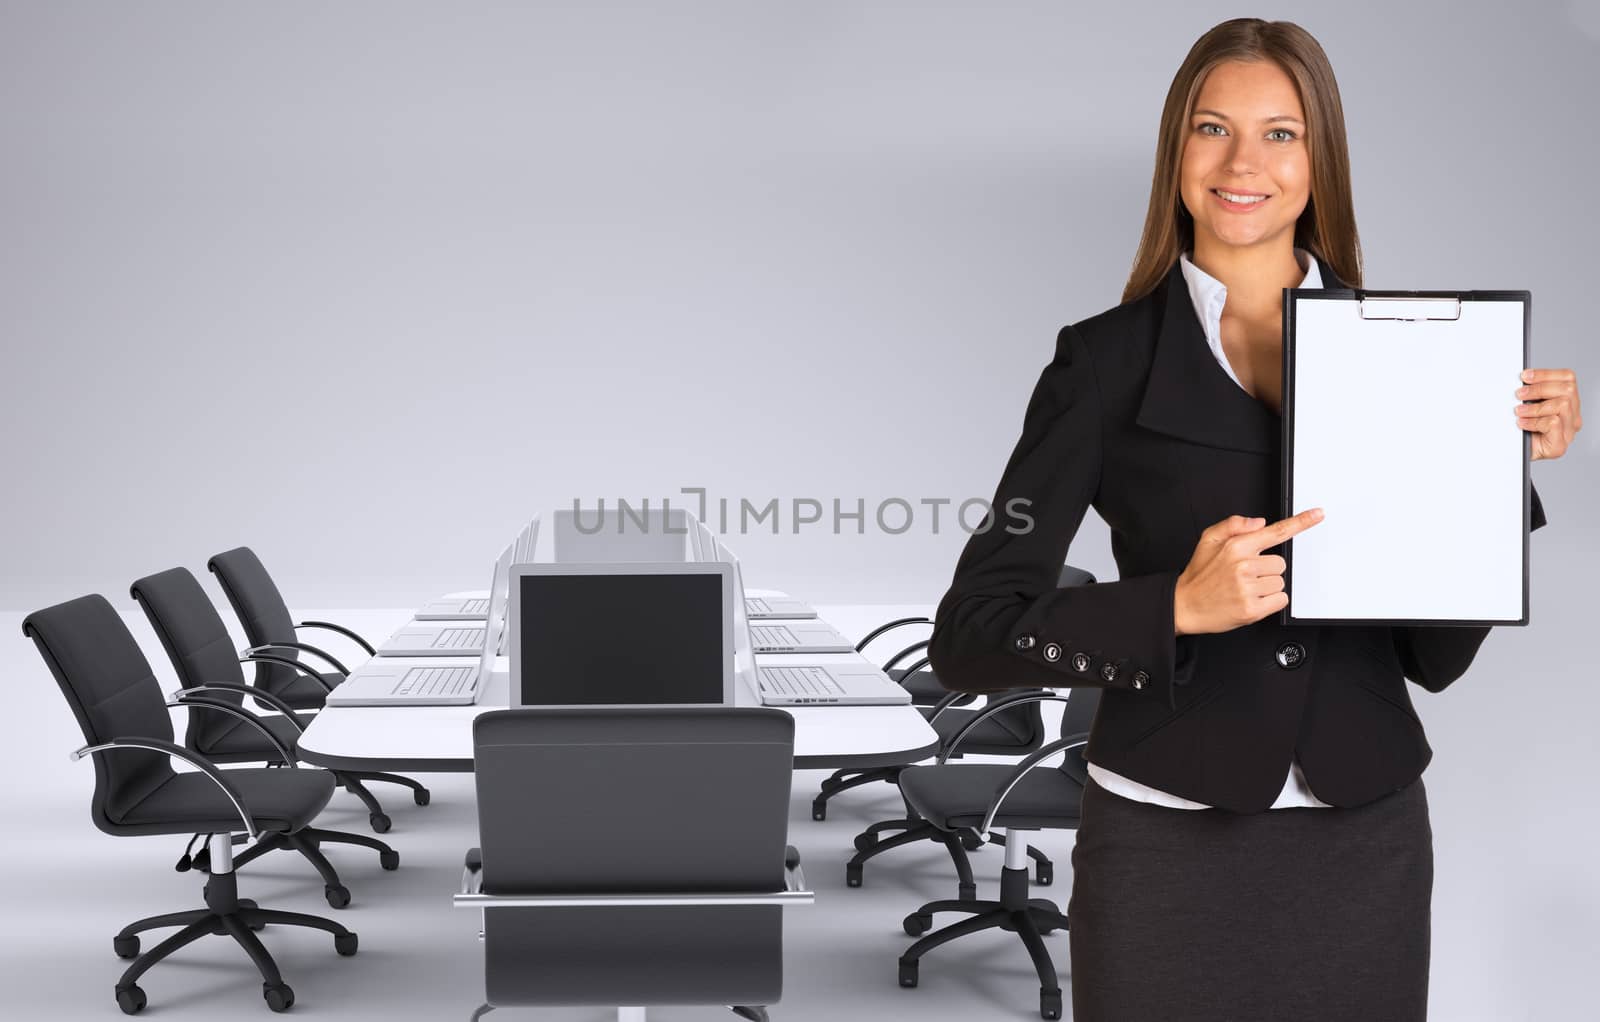 Businesswoman holding paper holder. Conference table, chairs and laptops as backdrop